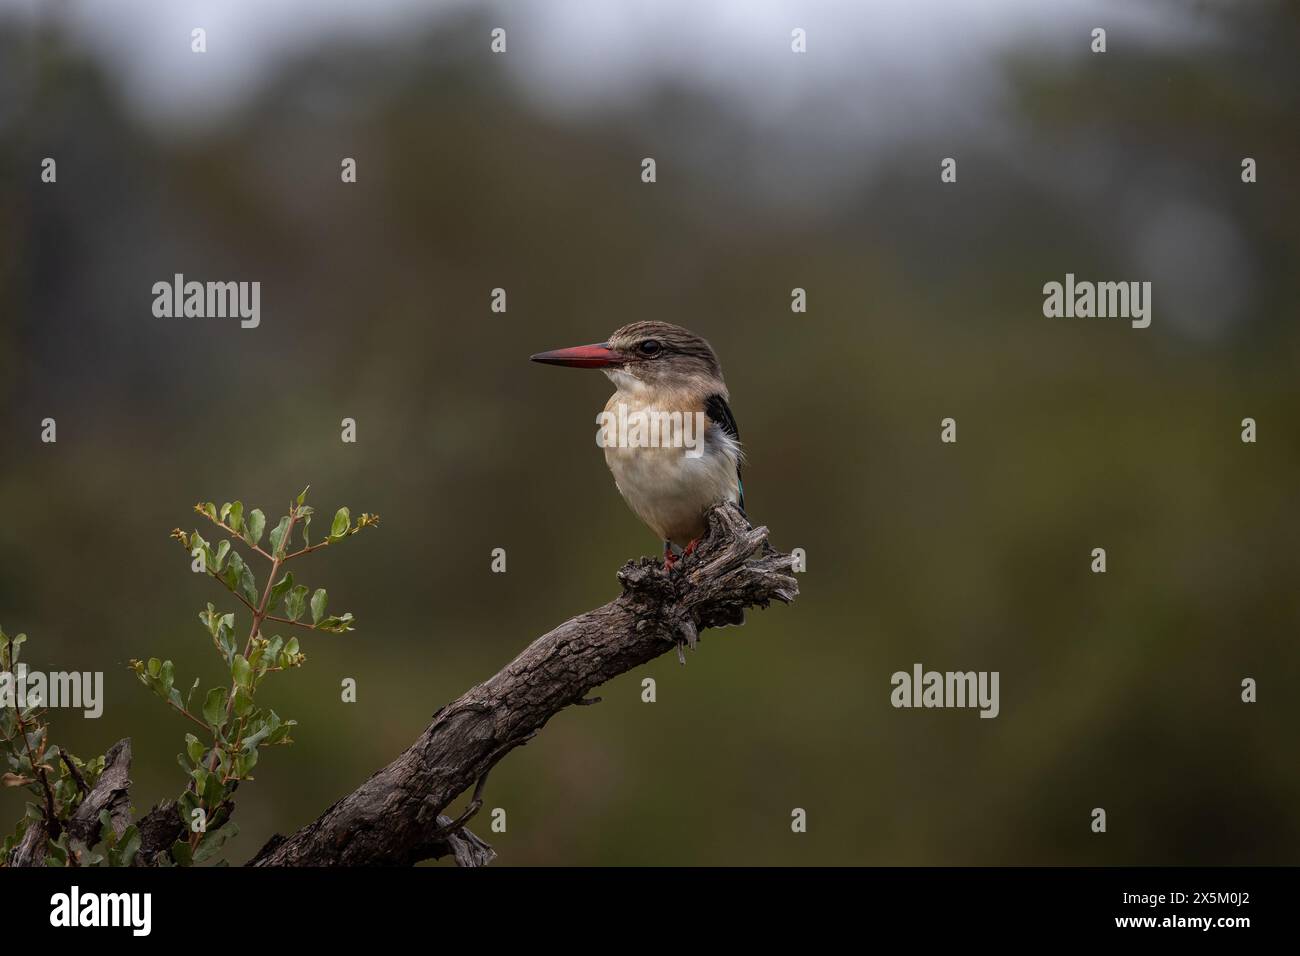 A Brown-hooded kingfisher, Halcyon albiventris, perched on a branch. Stock Photo